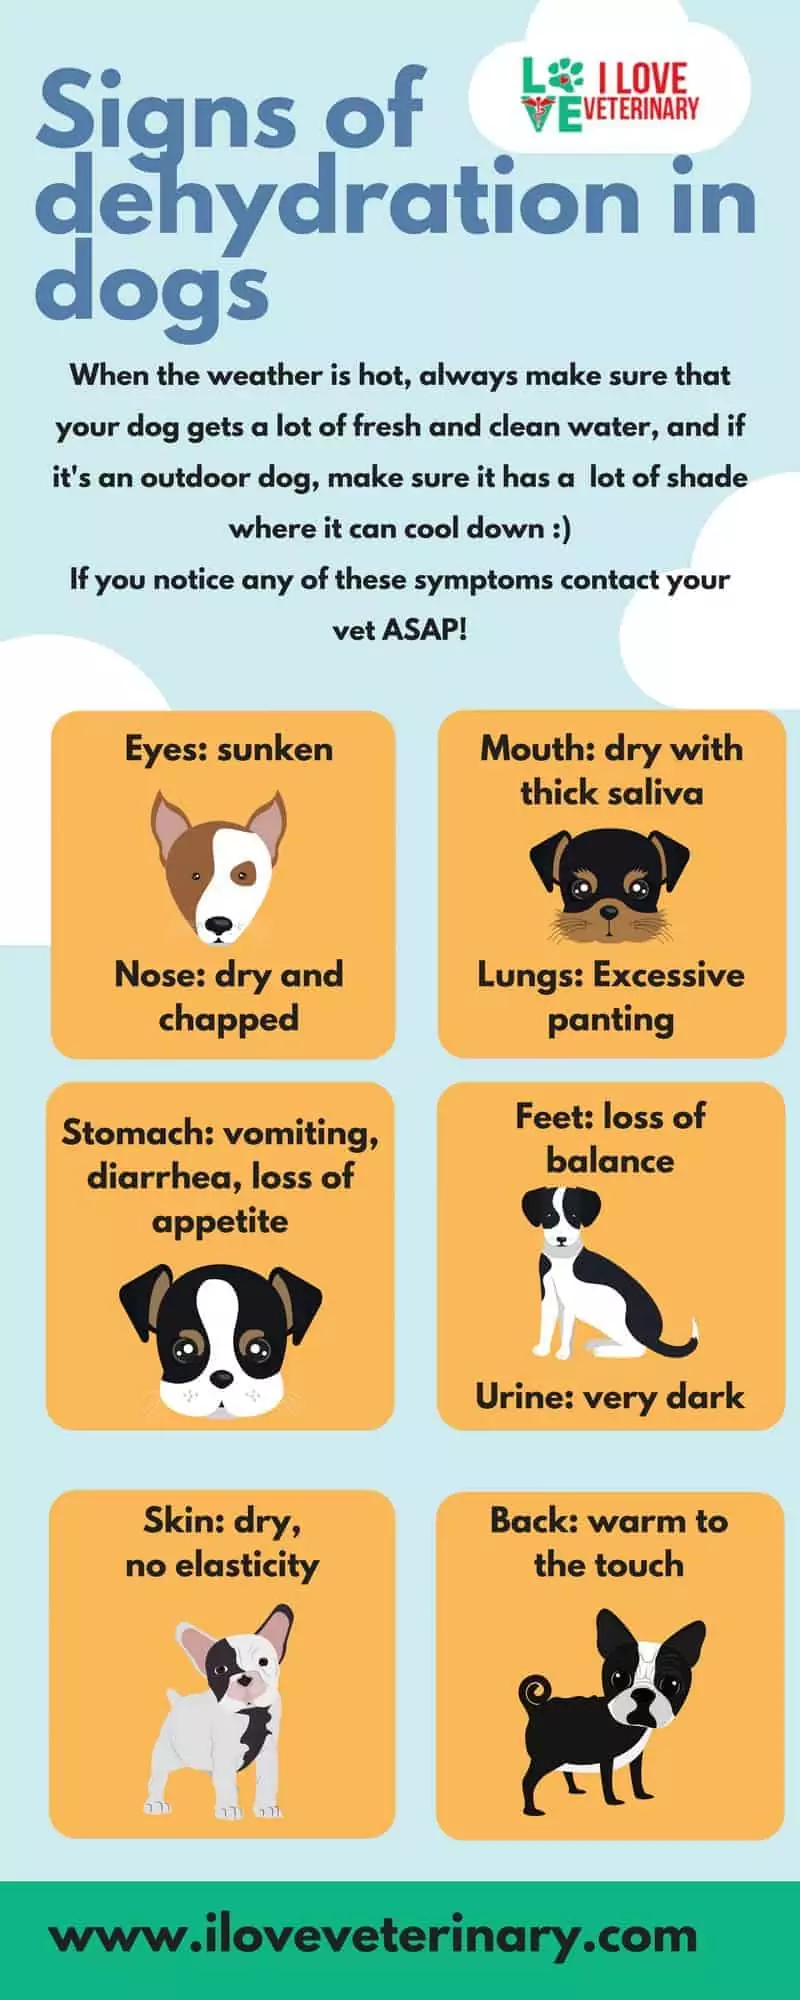 Signs of dehydration in dogs poster I Love Veterinary